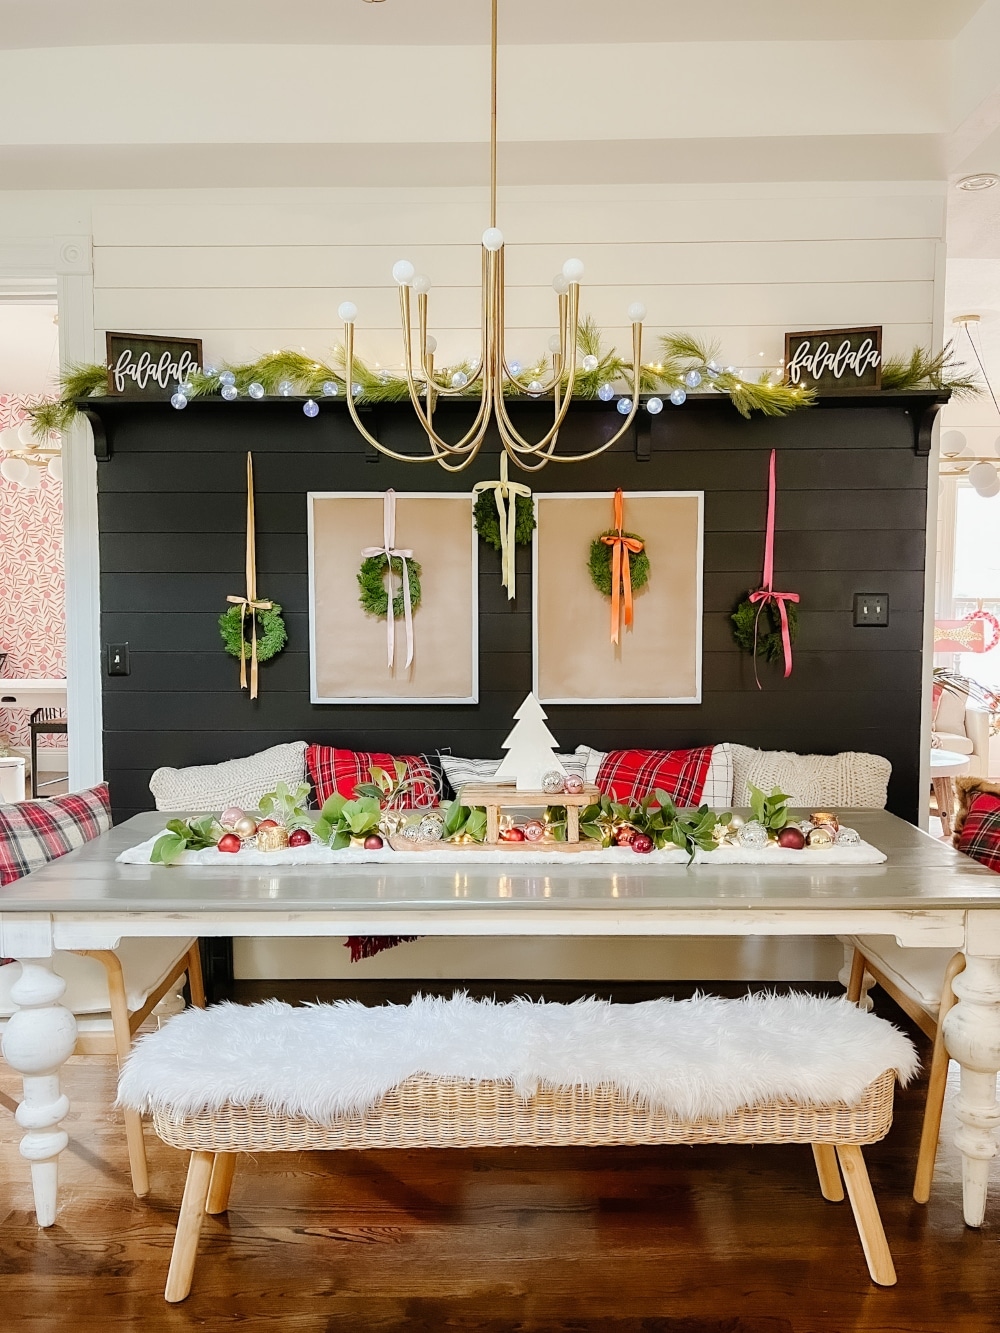 1891 Cottage Bright Holiday Tour. I'm sharing some easy ideas to bring happy colors to your home this holiday season! 